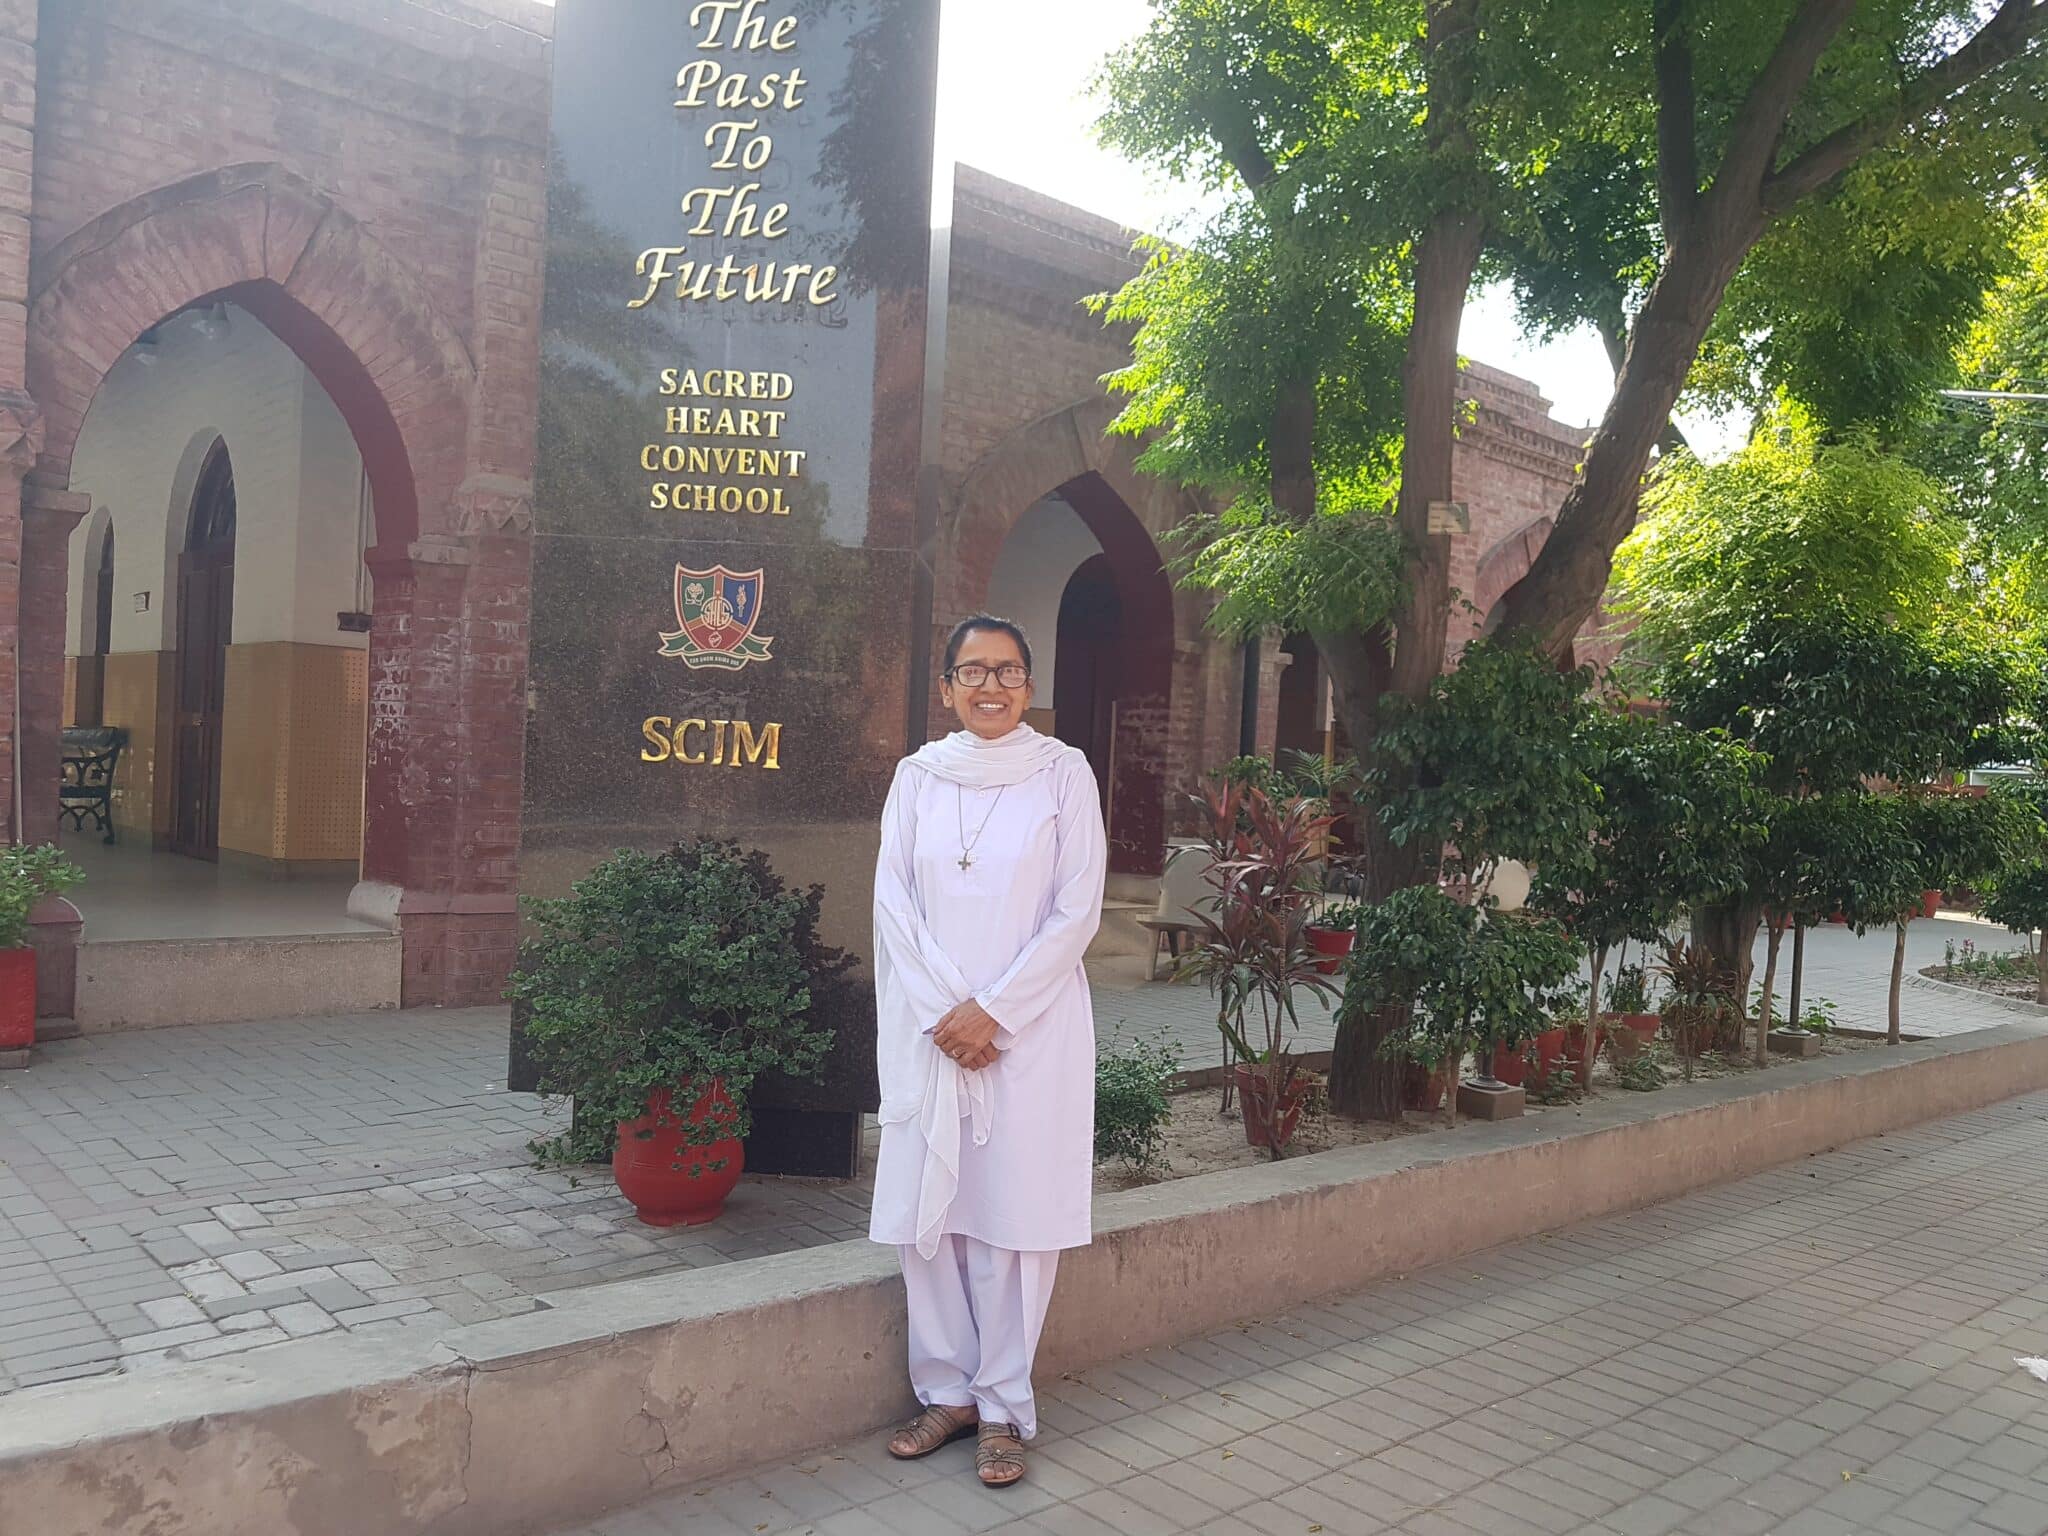 Sister Genevieve Ram Lal poses outside Sacred Heart Convent School in Lahore, Pakistan, May 15, 2023. A member of the Congregation of the Sisters of Charity of Jesus and Mary, Sister Ram Lal has been the national director of the Catholic Women's Organization since 2012. She and her organization, which she calls the "family," work to empower women in Pakistan. (OSV News photo/Kamran Chaudhry, Global Sisters Report)